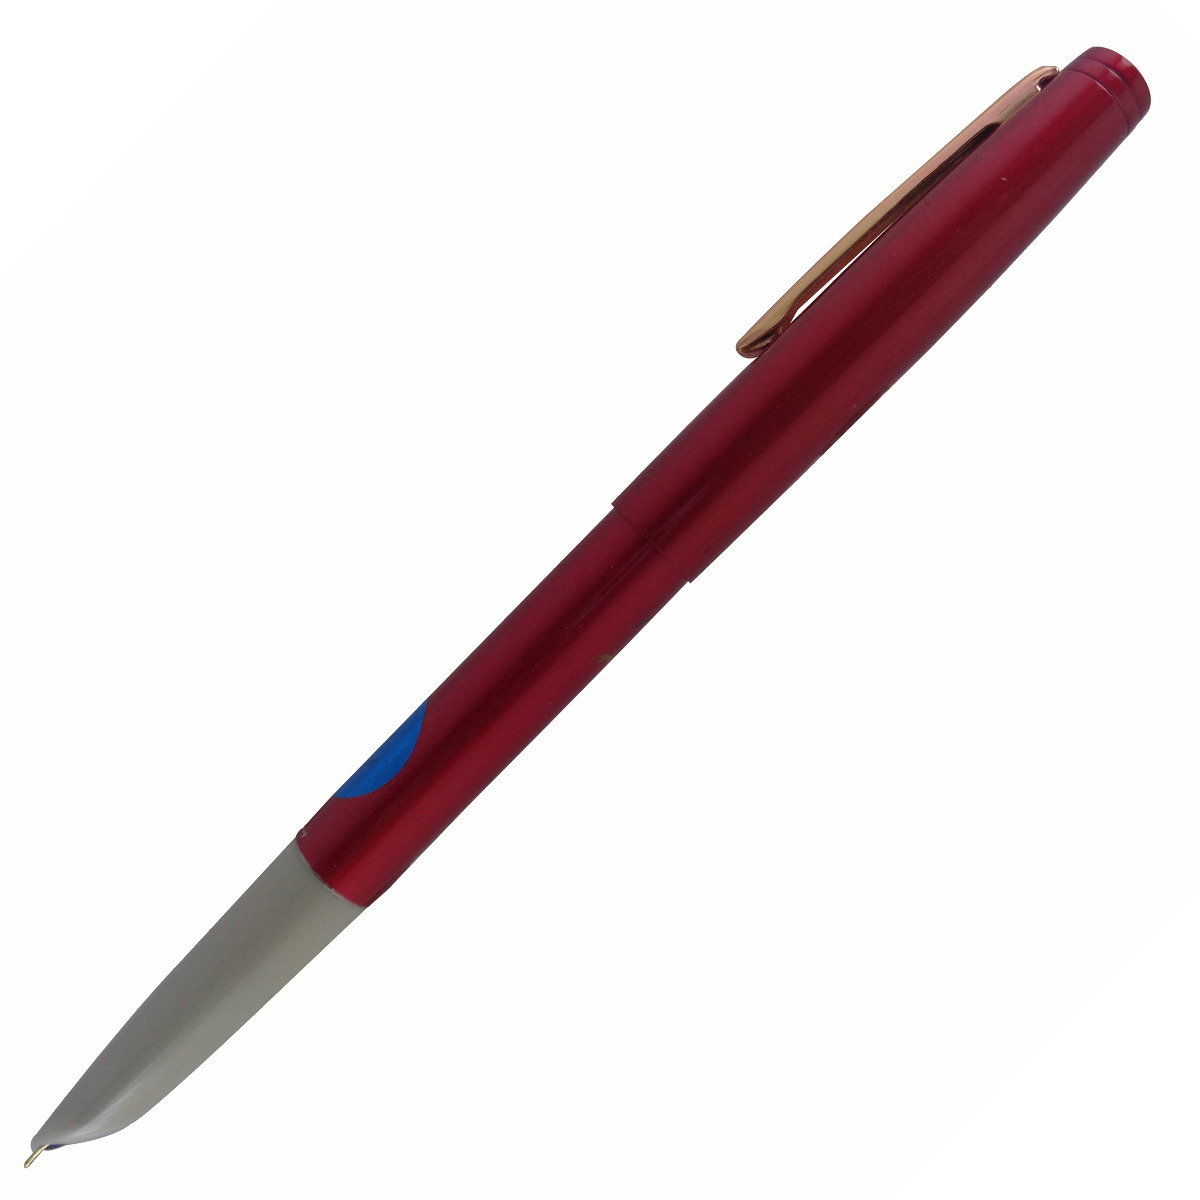 Hero 343 Model: 14516 Red color body with golden color clip fine tip cap type fountain pen